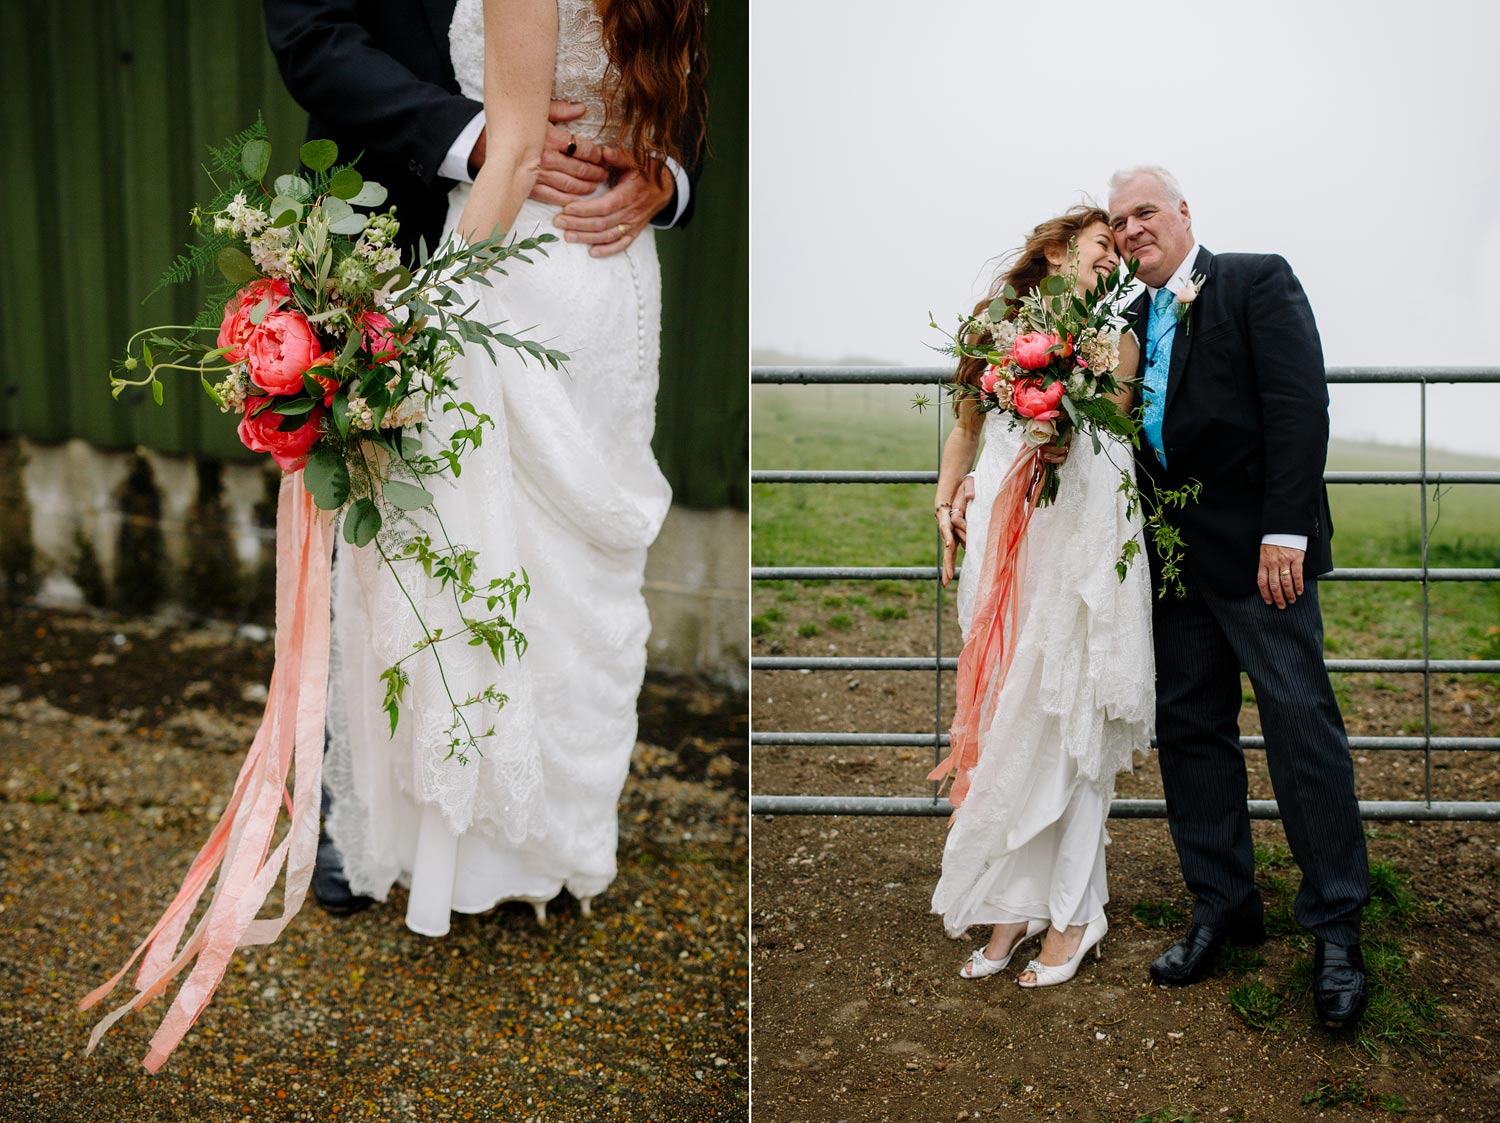 Gorgeous bouquet with peonies and roses at a Pangdean Barn wedding